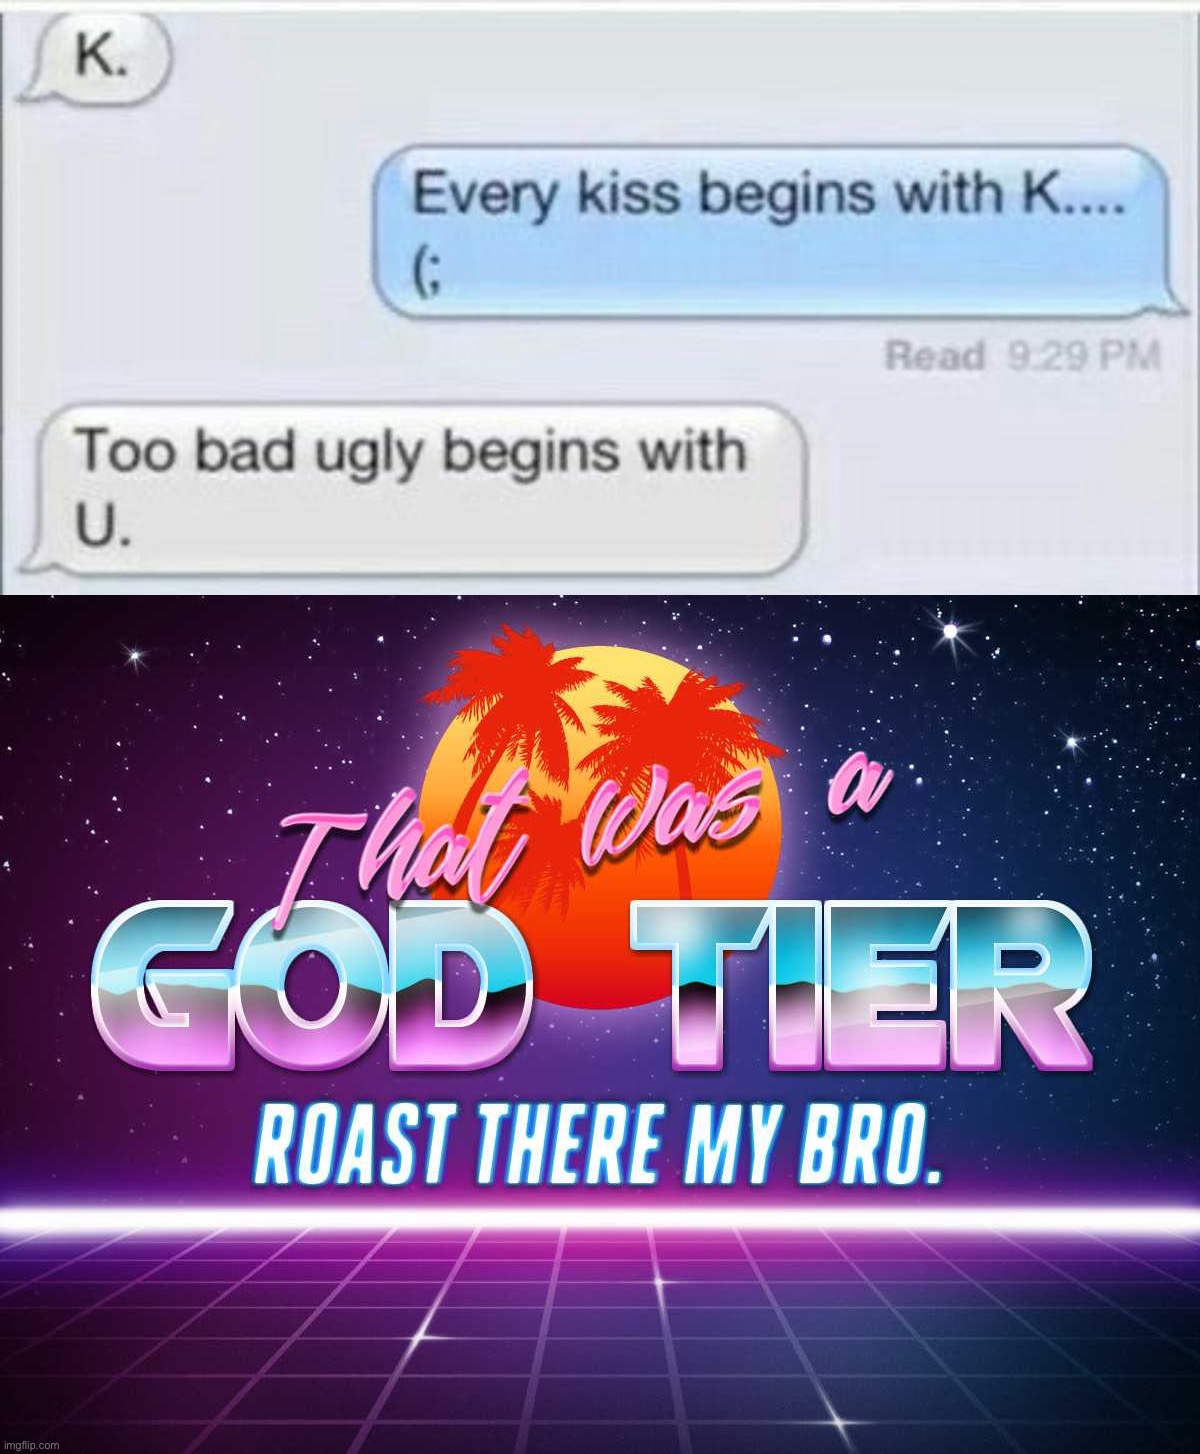 Apply cold water to the burned area for the next: 1,000,000 years! | image tagged in that was a god tier roast my bro,memes,funny,savage,funny texts,tyrannosaurus rekt | made w/ Imgflip meme maker